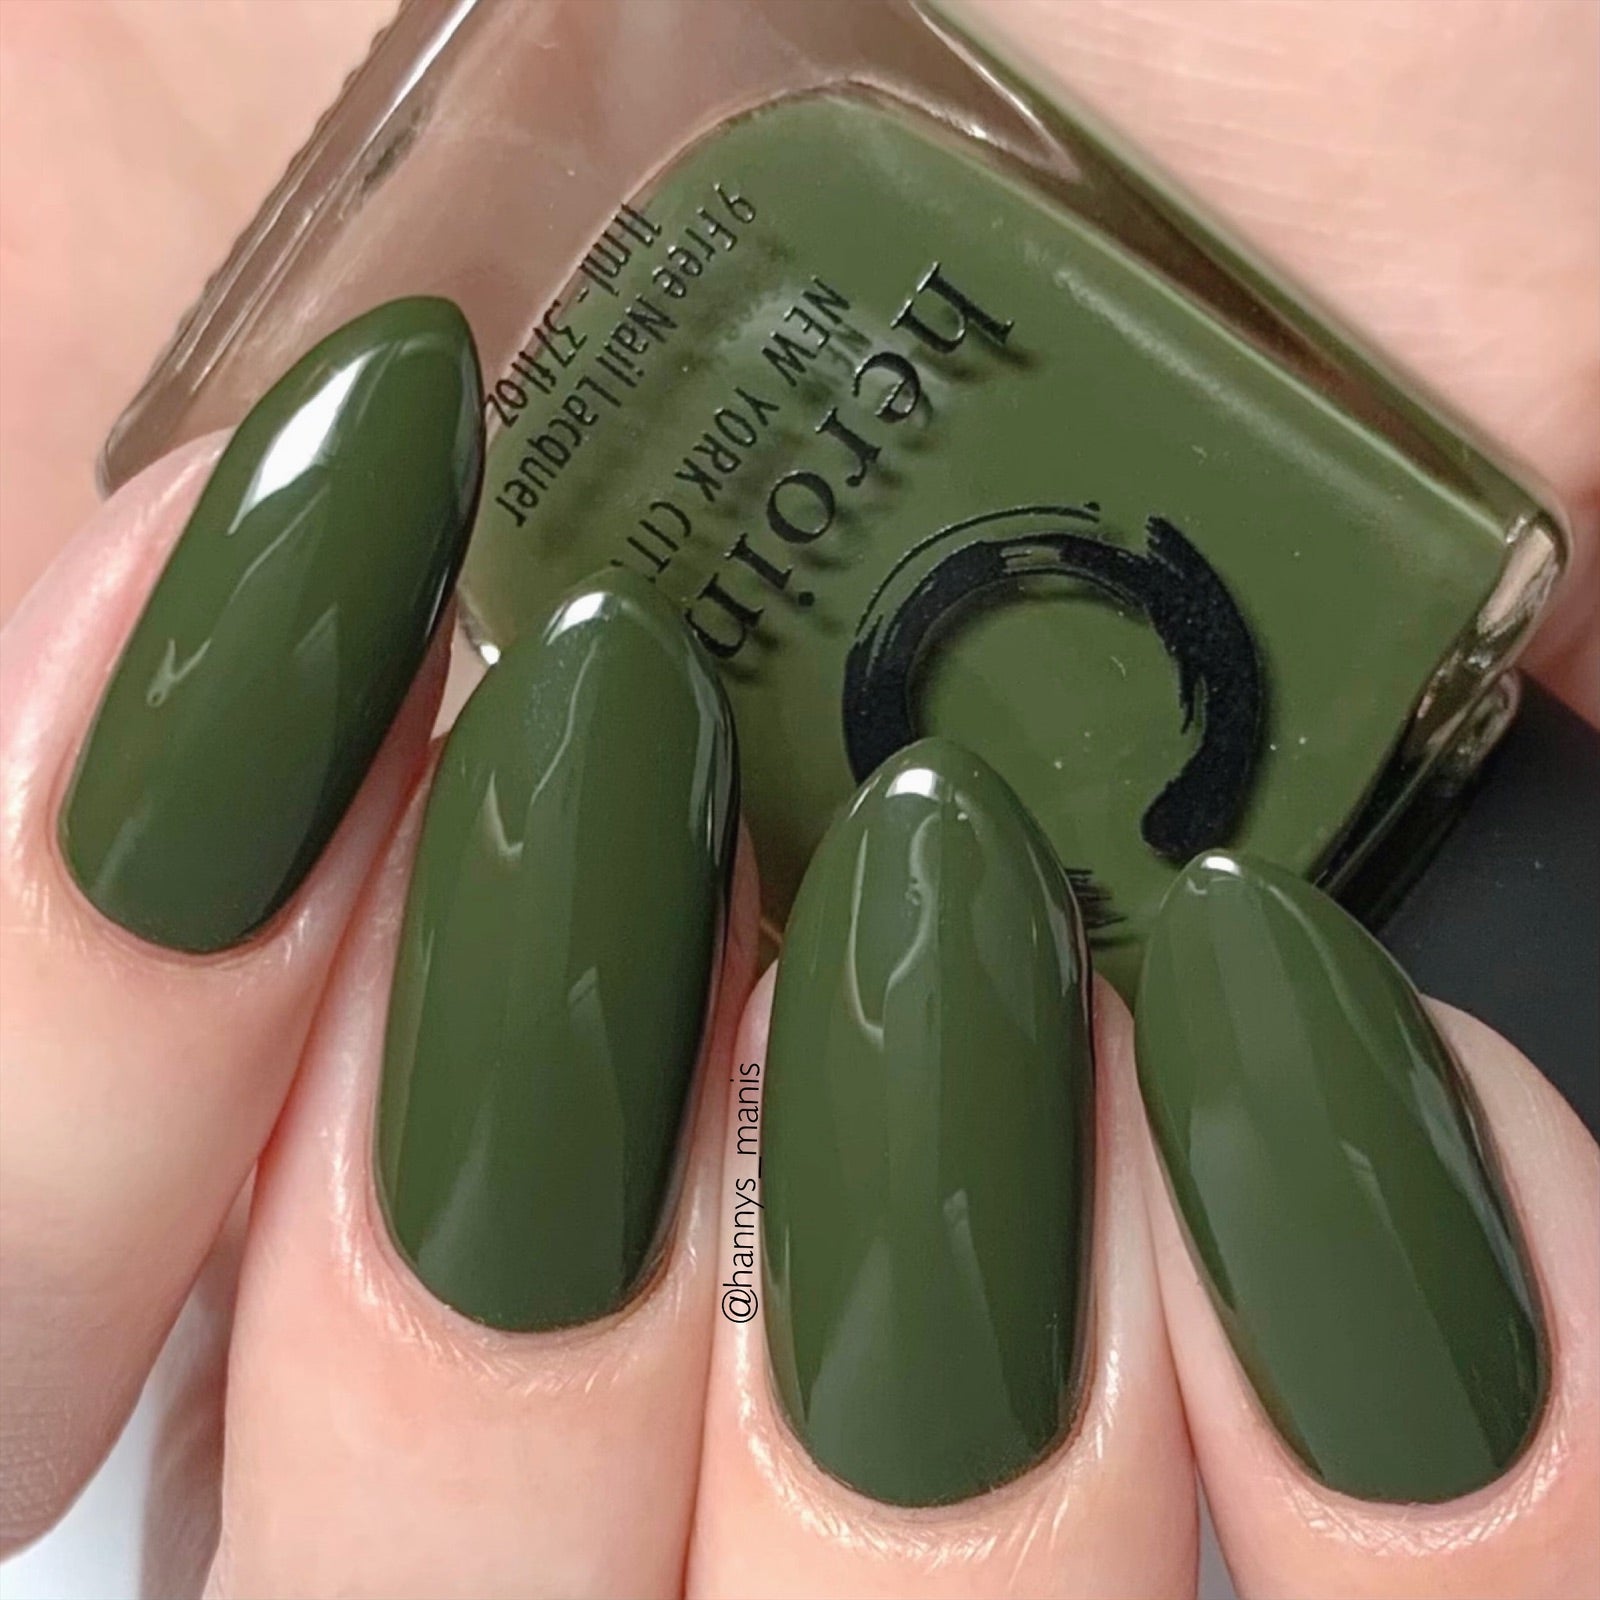 Buy SUGAR POP Nail Lacquer - 24 Keen Green (Olive Green) 10 Ml - Dries In  45 Seconds - Quick-Drying, Chip-Resistant, Long-Lasting. Glossy Finish High  Shine Nail Enamel/Polish For Women. Online at